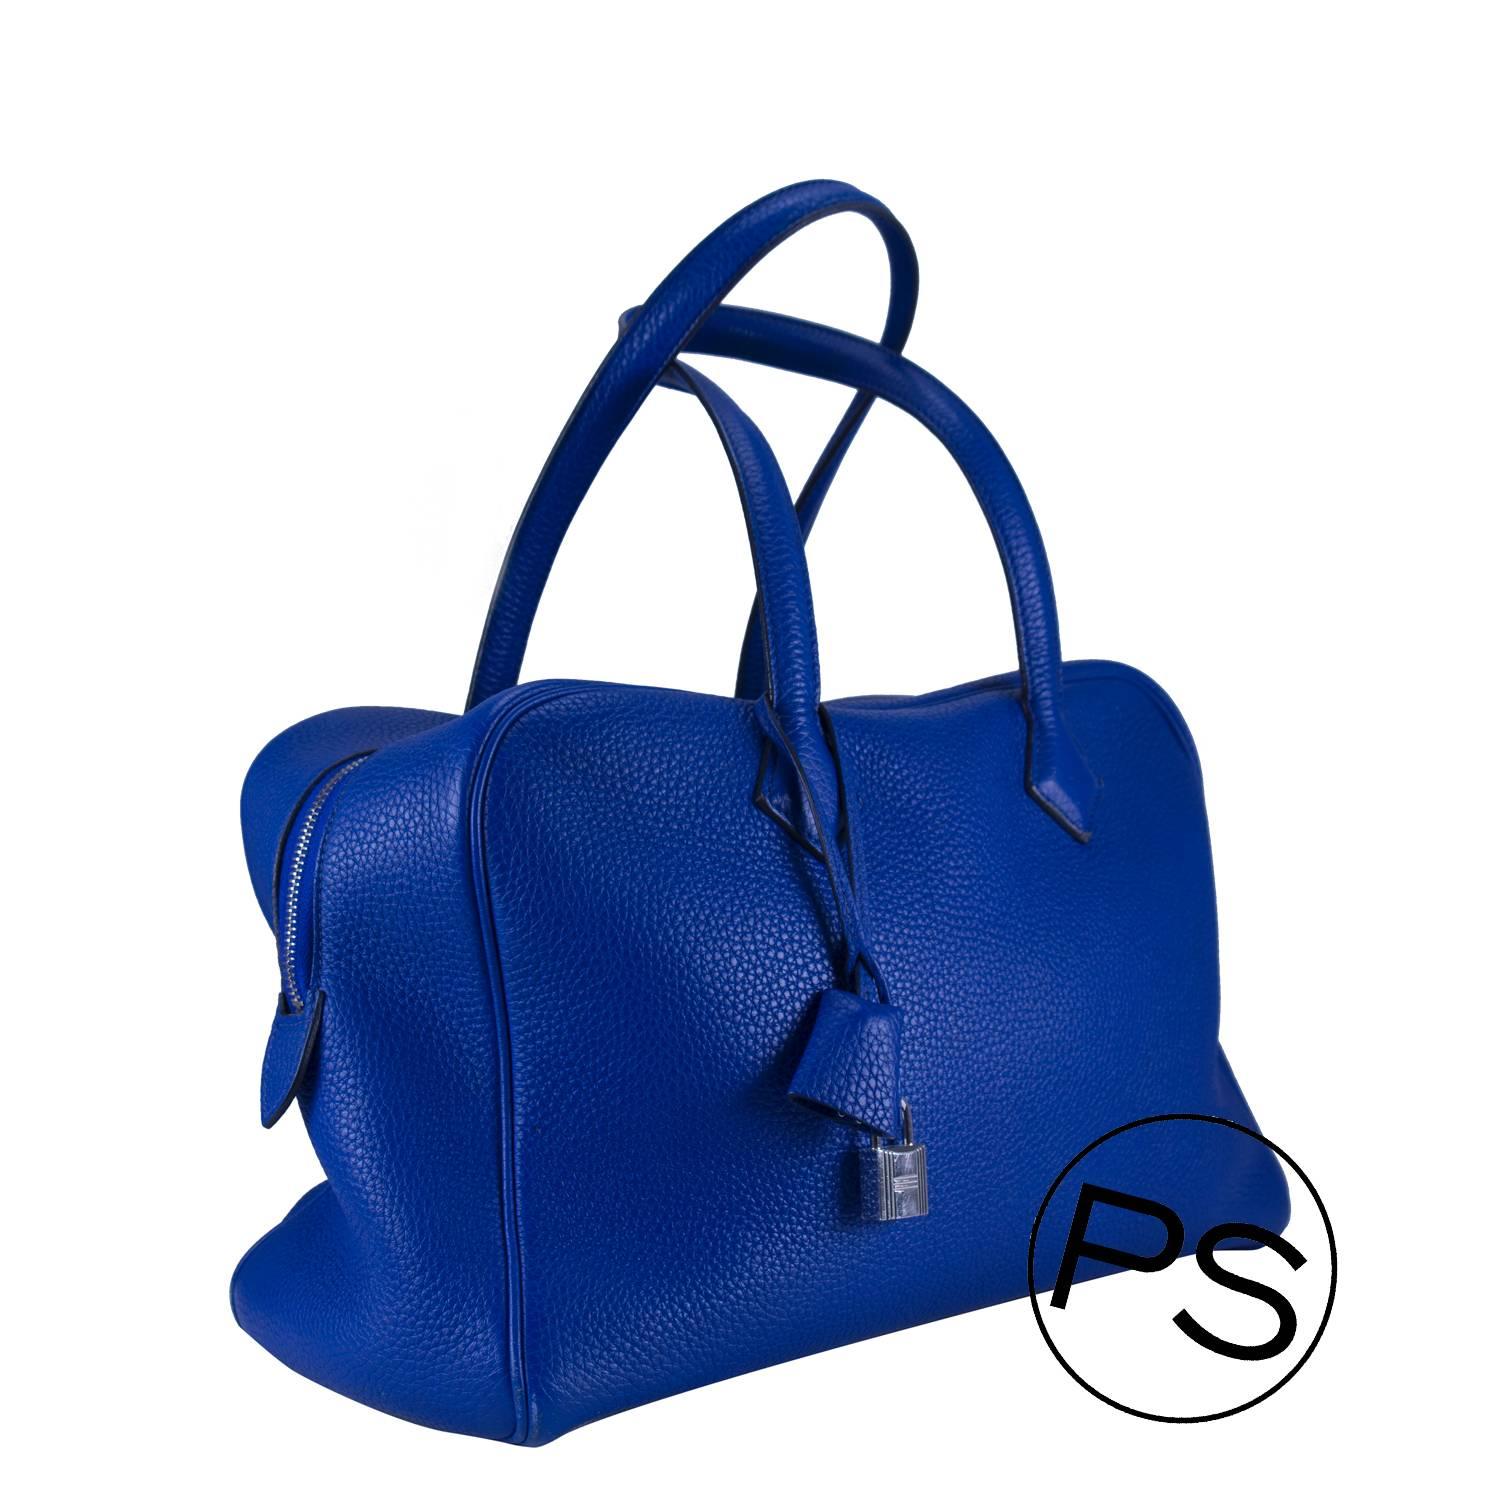 Hermes Handbag Victoria II Blue 2013

Pre-owned and used.

Bought it in Hermes store in 2013.

Composition; Leather

Model; Victoria II

Color; Blue.

-Shipment and Insurance, 100% Safe.

-Secure payment to the company. (bank